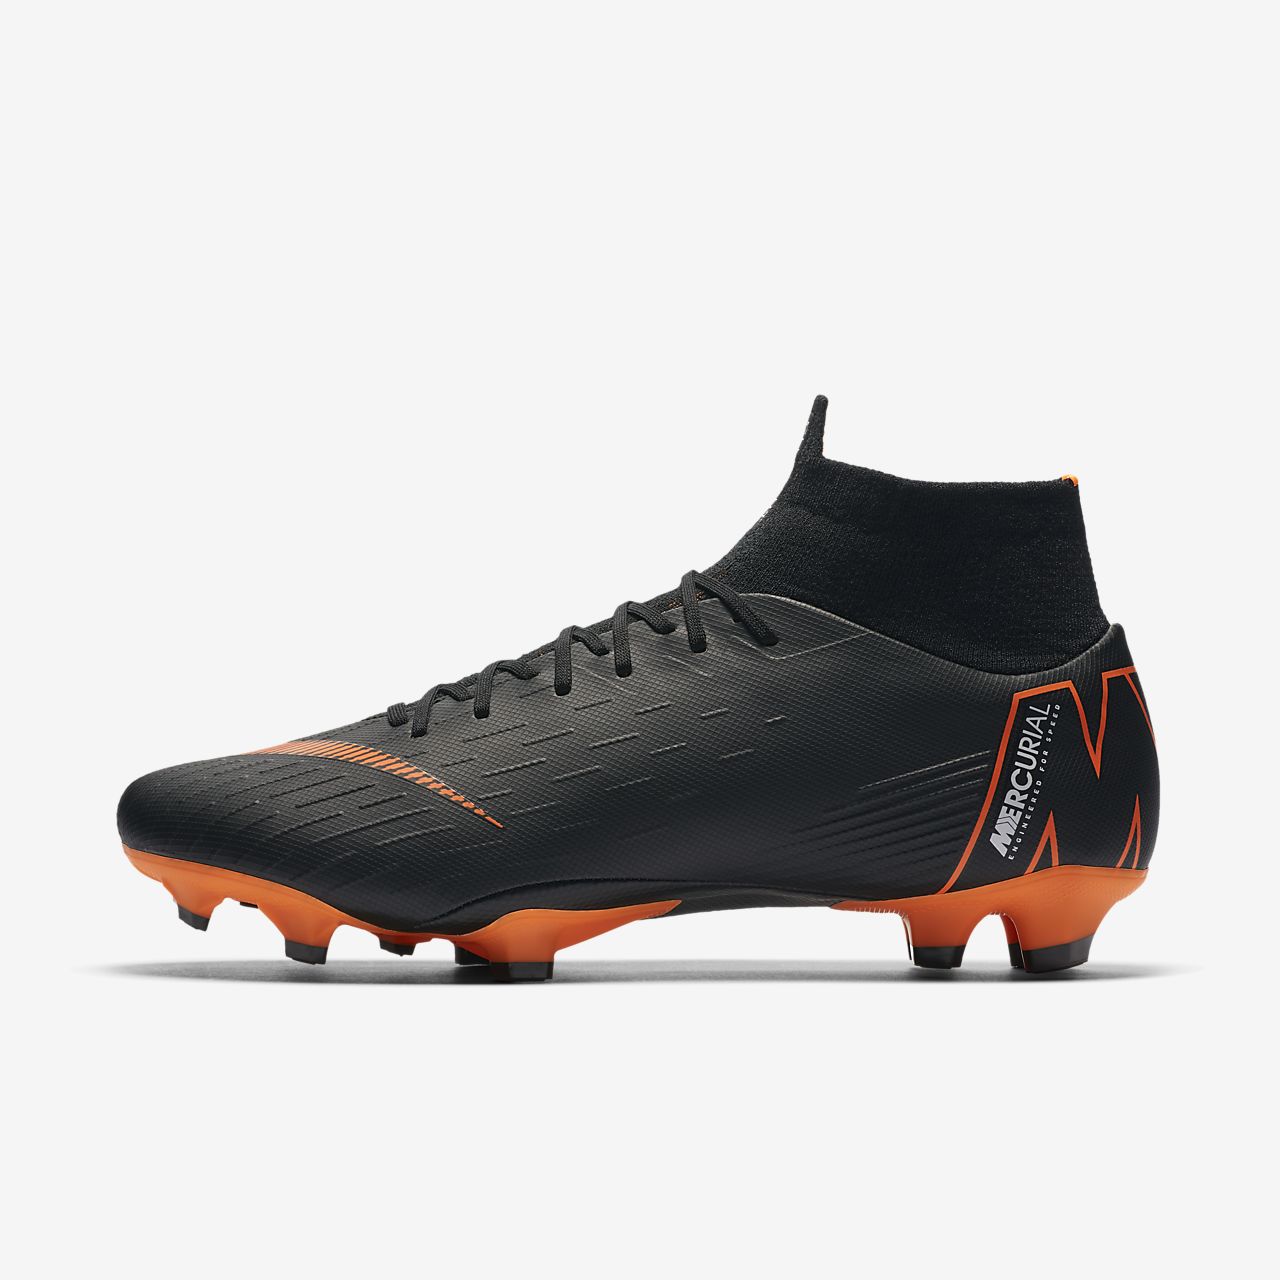 Football Boots Nike Mercurial Superfly VI Academy SG Pro.